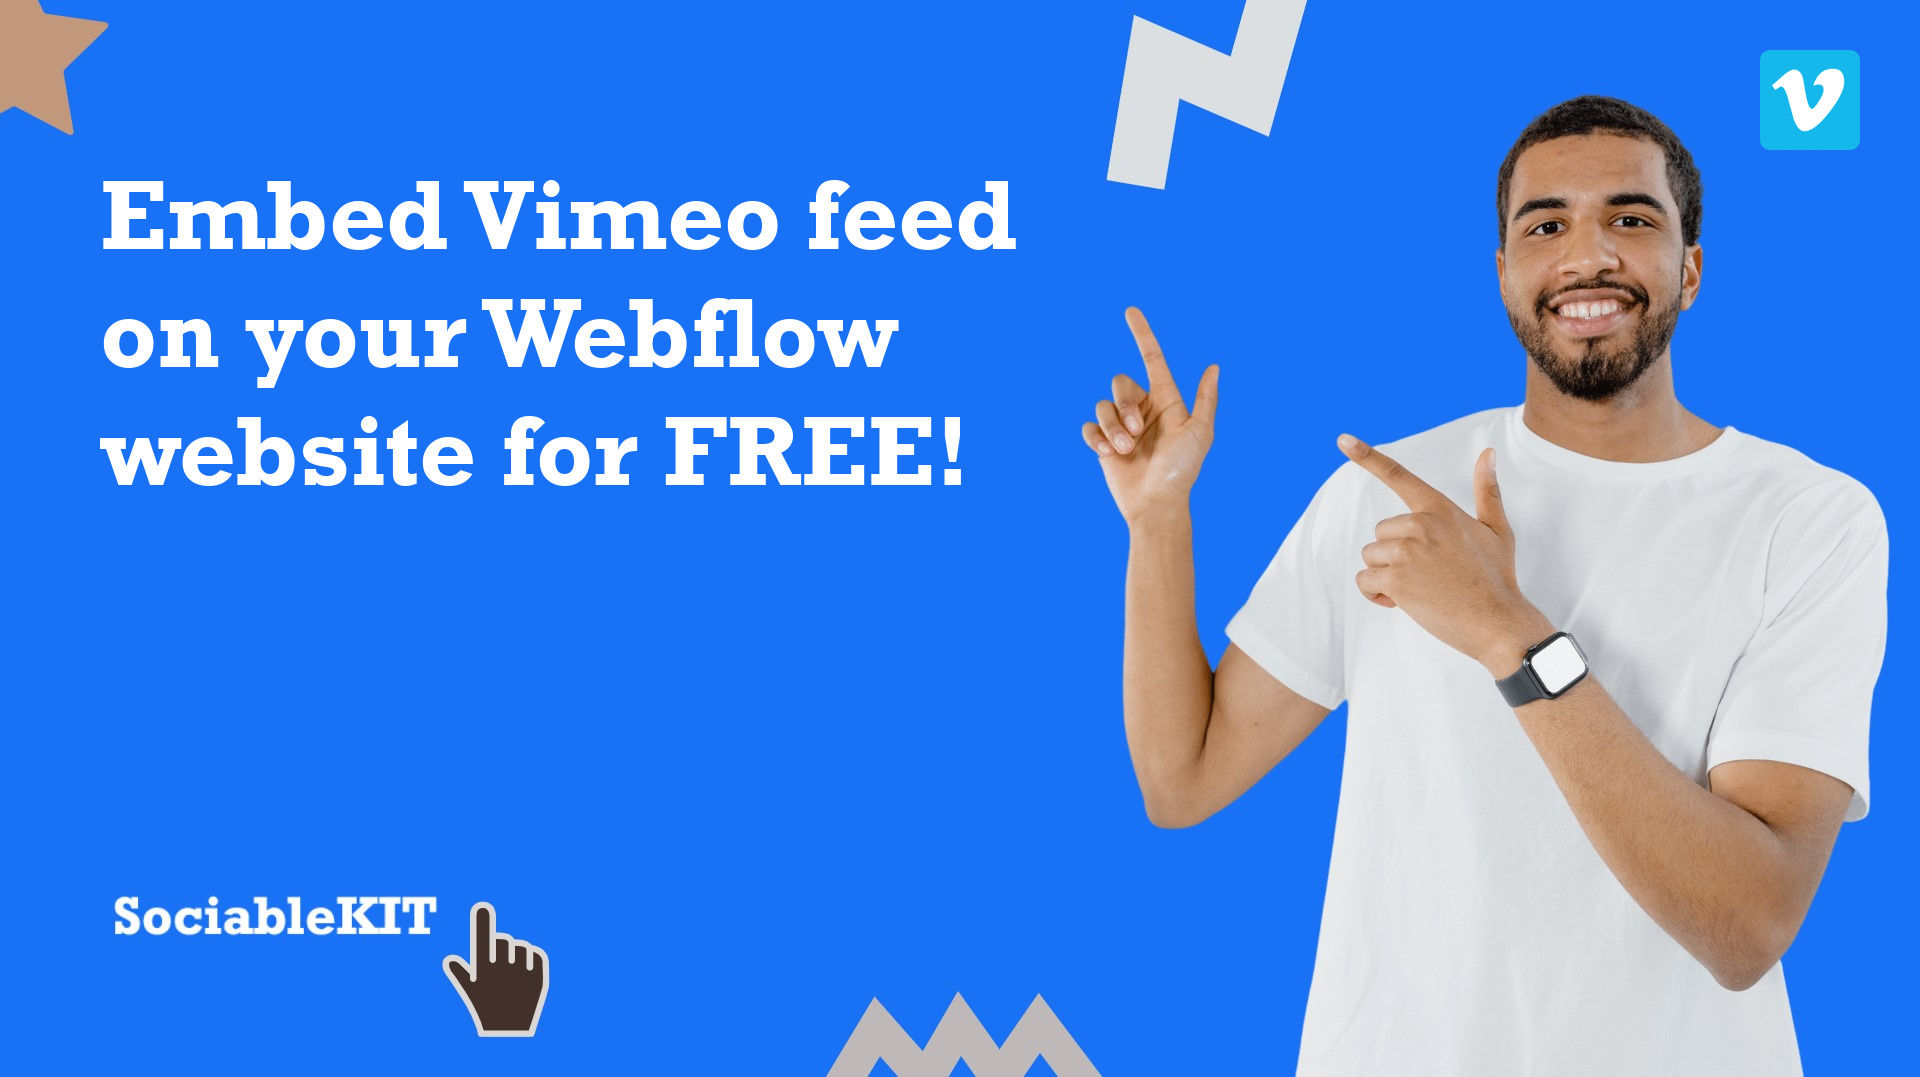 How to embed Vimeo feed on your Webflow website for FREE?